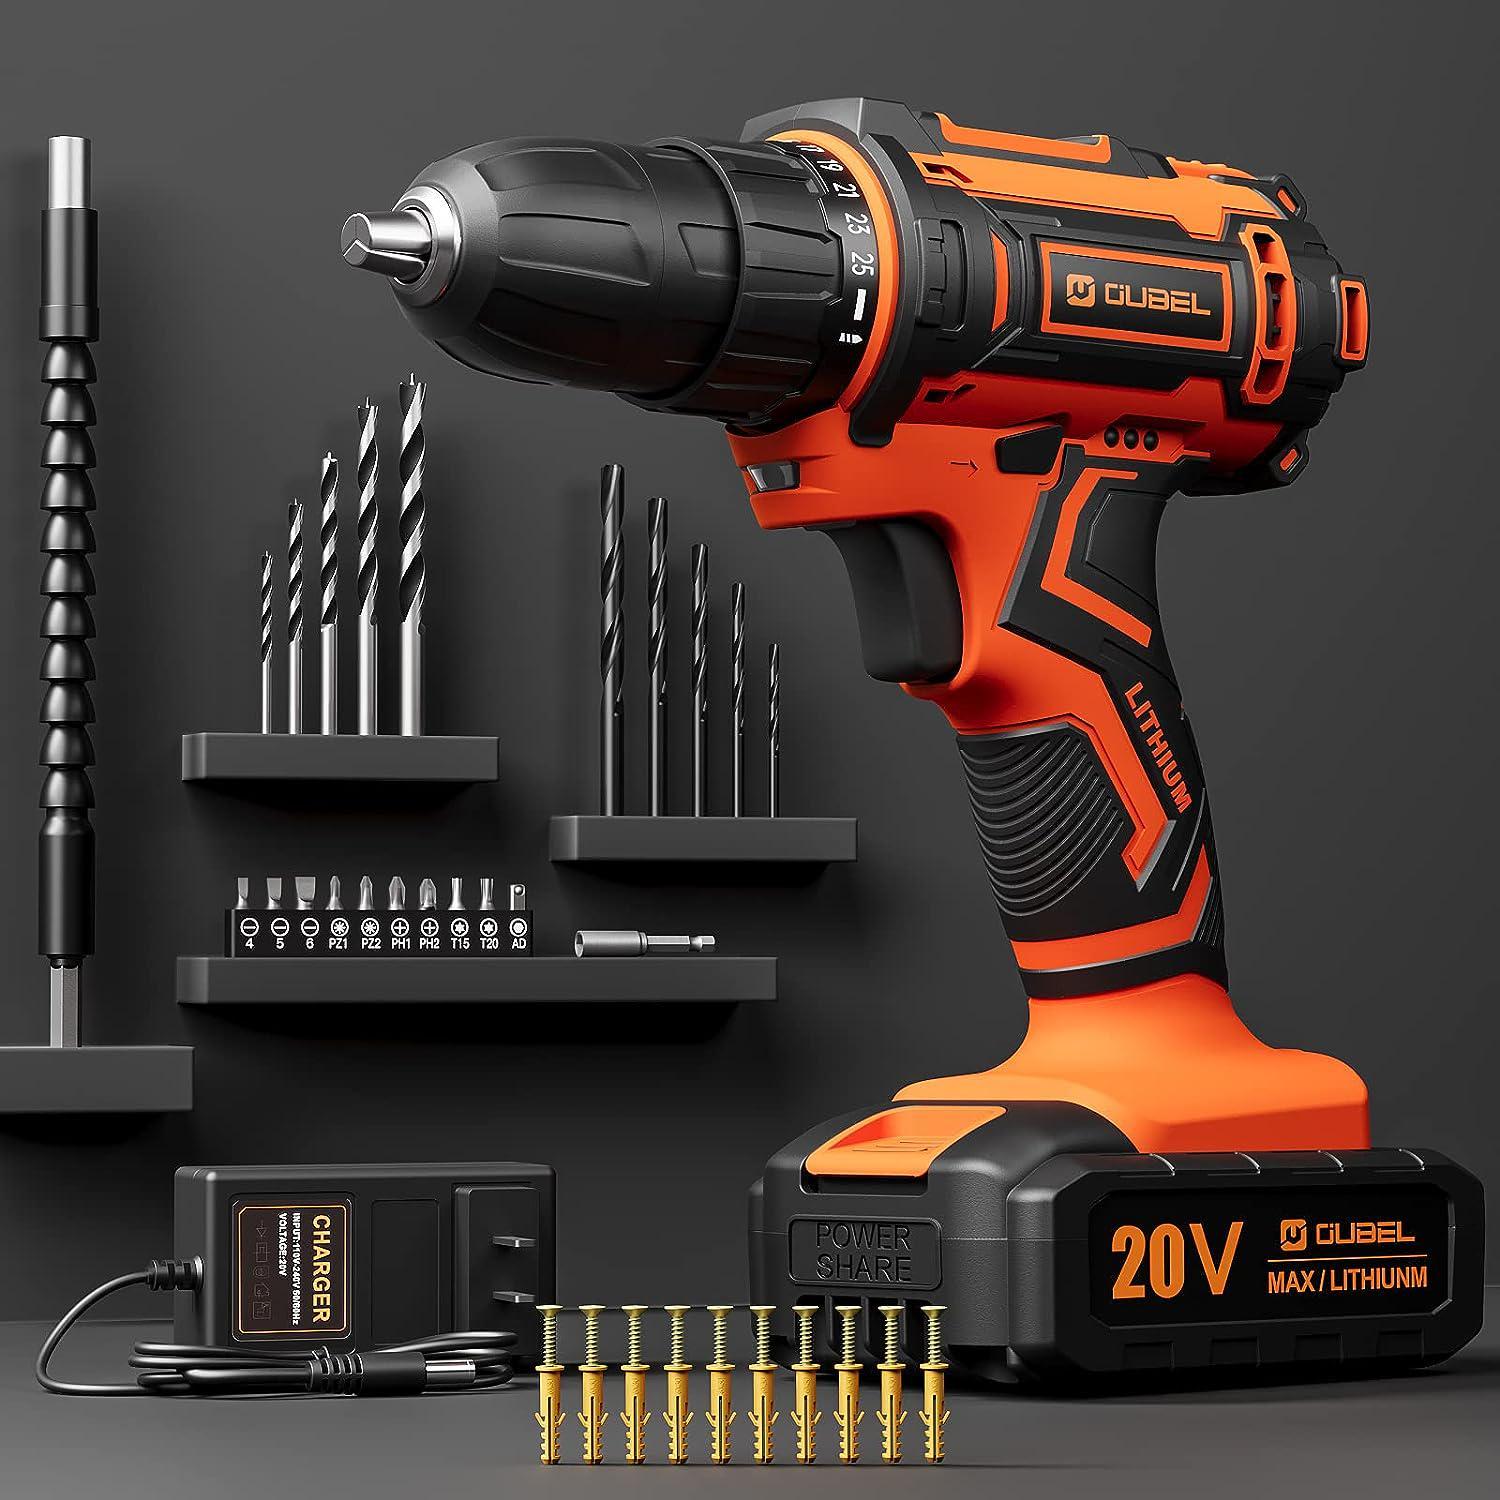 FADAKWALT 20V MAX Cordless Drill Set,Power Drill Kit with Lithium-Ion and  charger, 3/8-Inch Keyless Chuck, 2 Variable Speed 21+1 Torque Setting Power